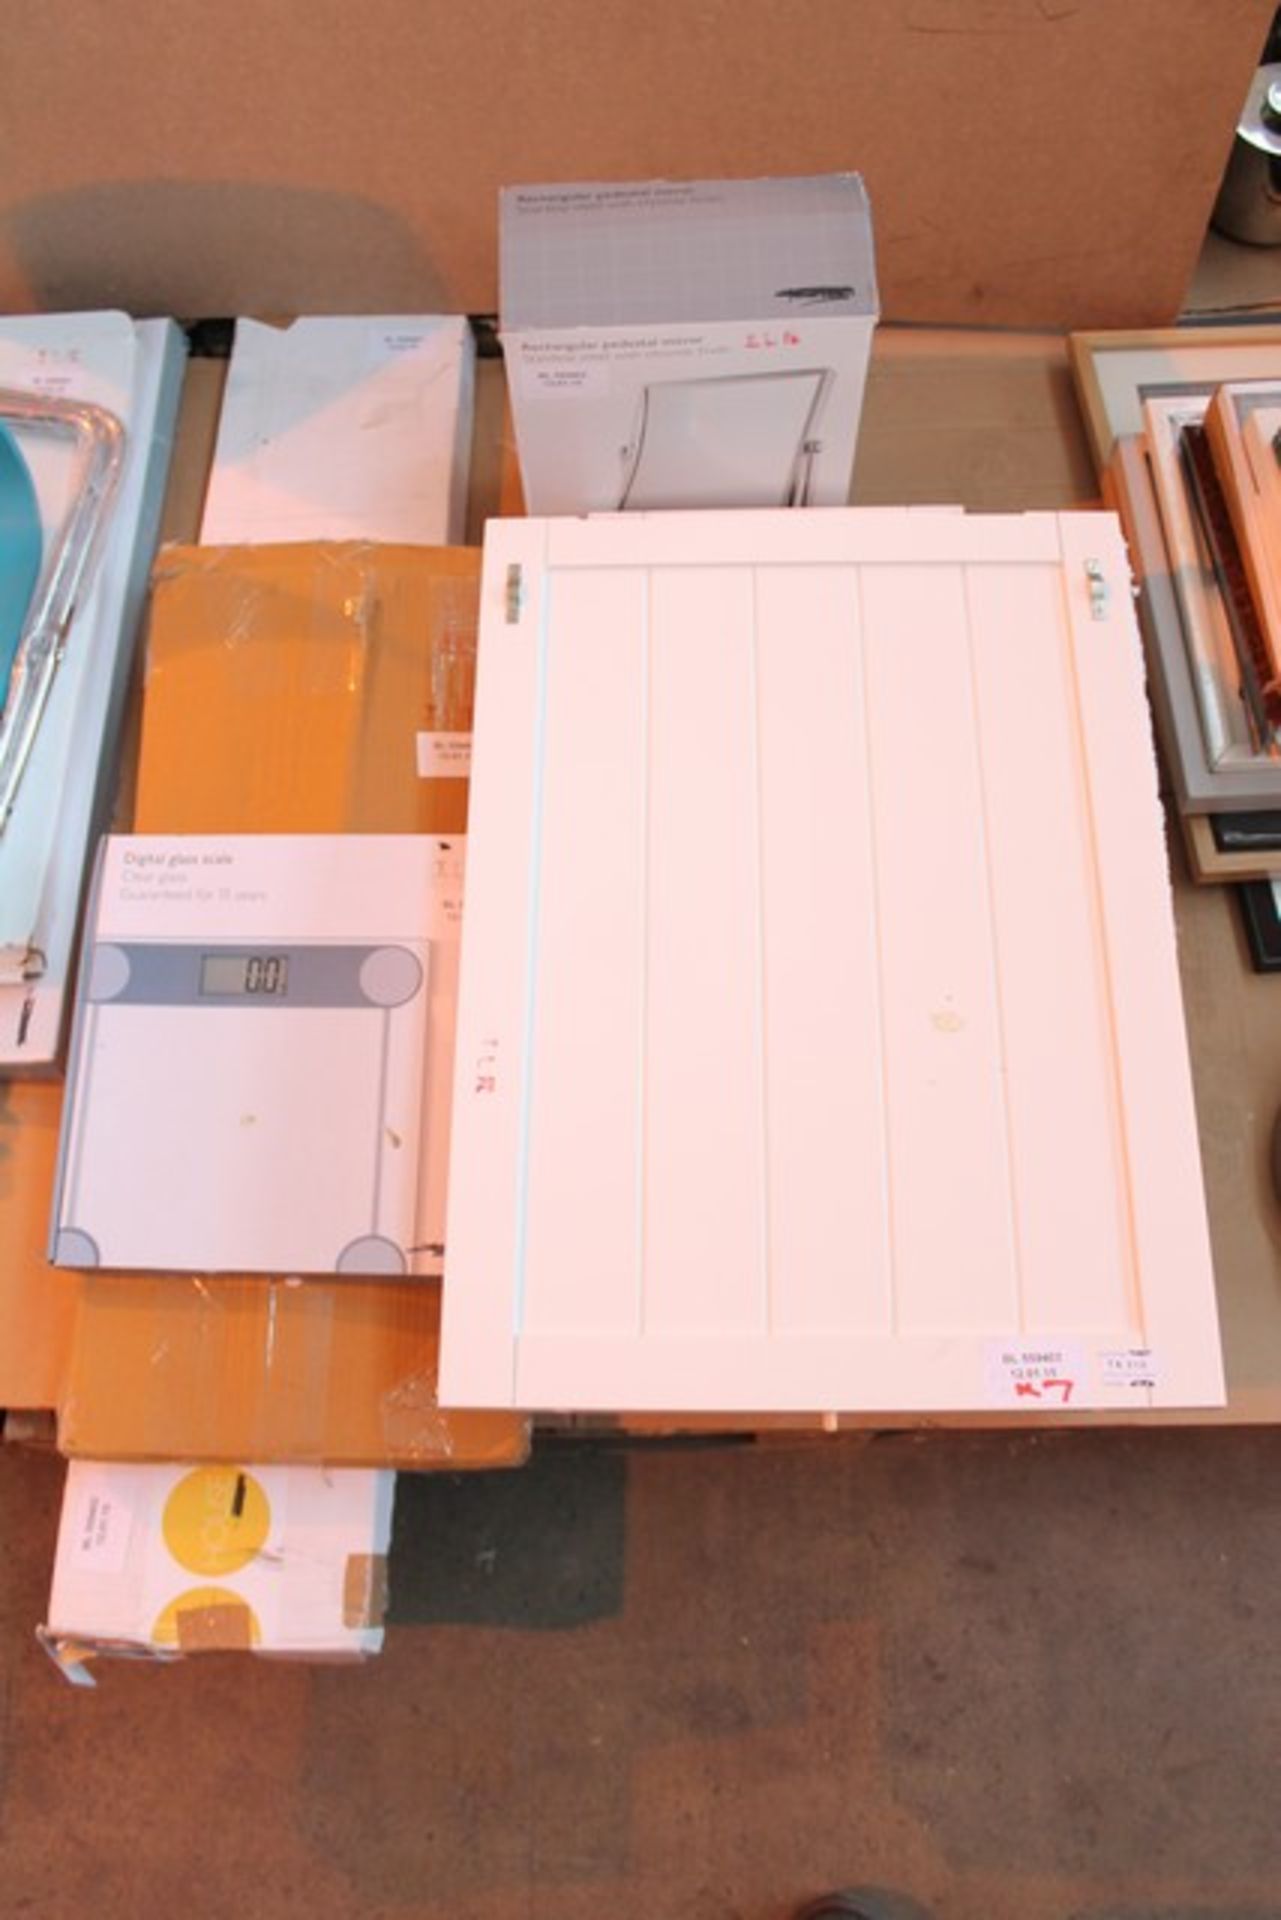 ONE LOT TO CONTAIN 7X BOXED AND UNBOXED ITEMS TO INCLUDE RECTANGULAR PEDESTAL MIRROR, DIGITAL